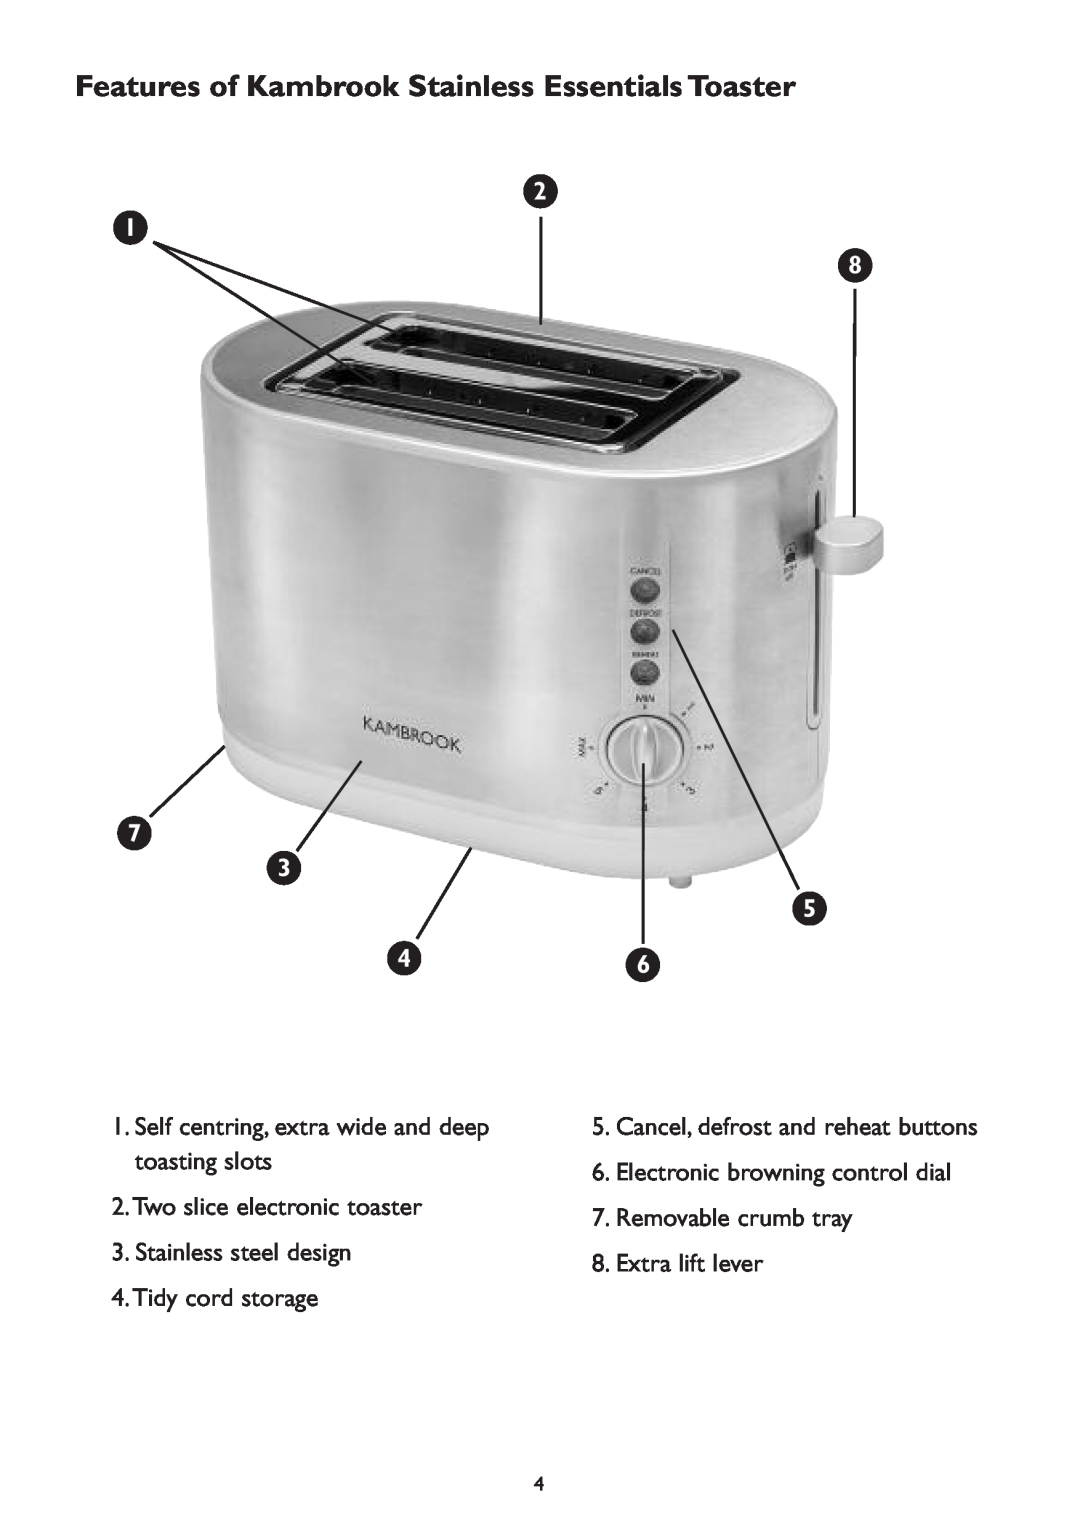 Kambrook KT100 manual Features of Kambrook Stainless Essentials Toaster, 2 1 8 7, Two slice electronic toaster 